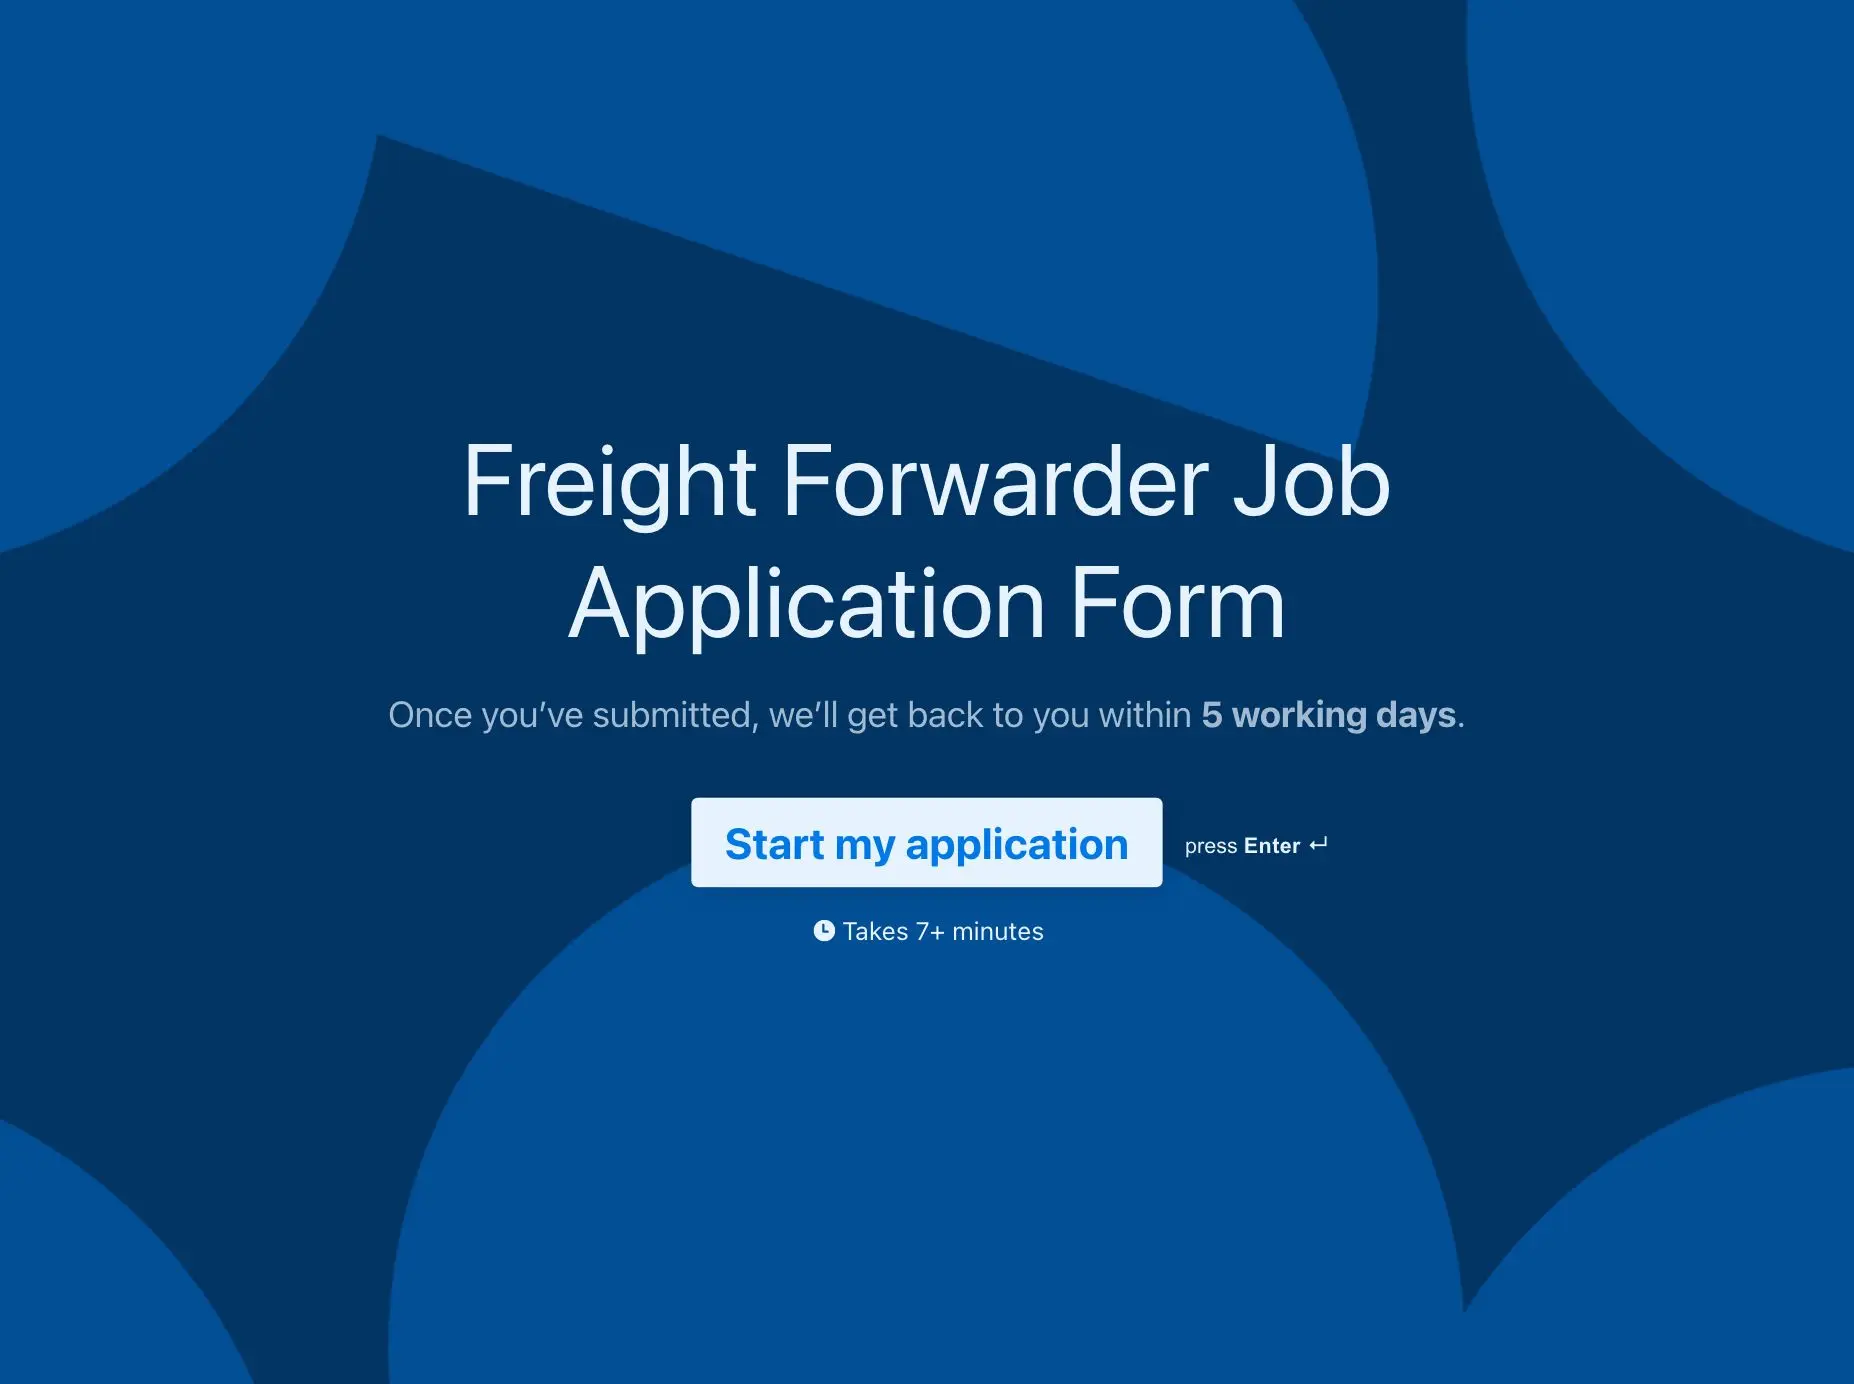 Freight Forwarder Job Application Form Template Hero